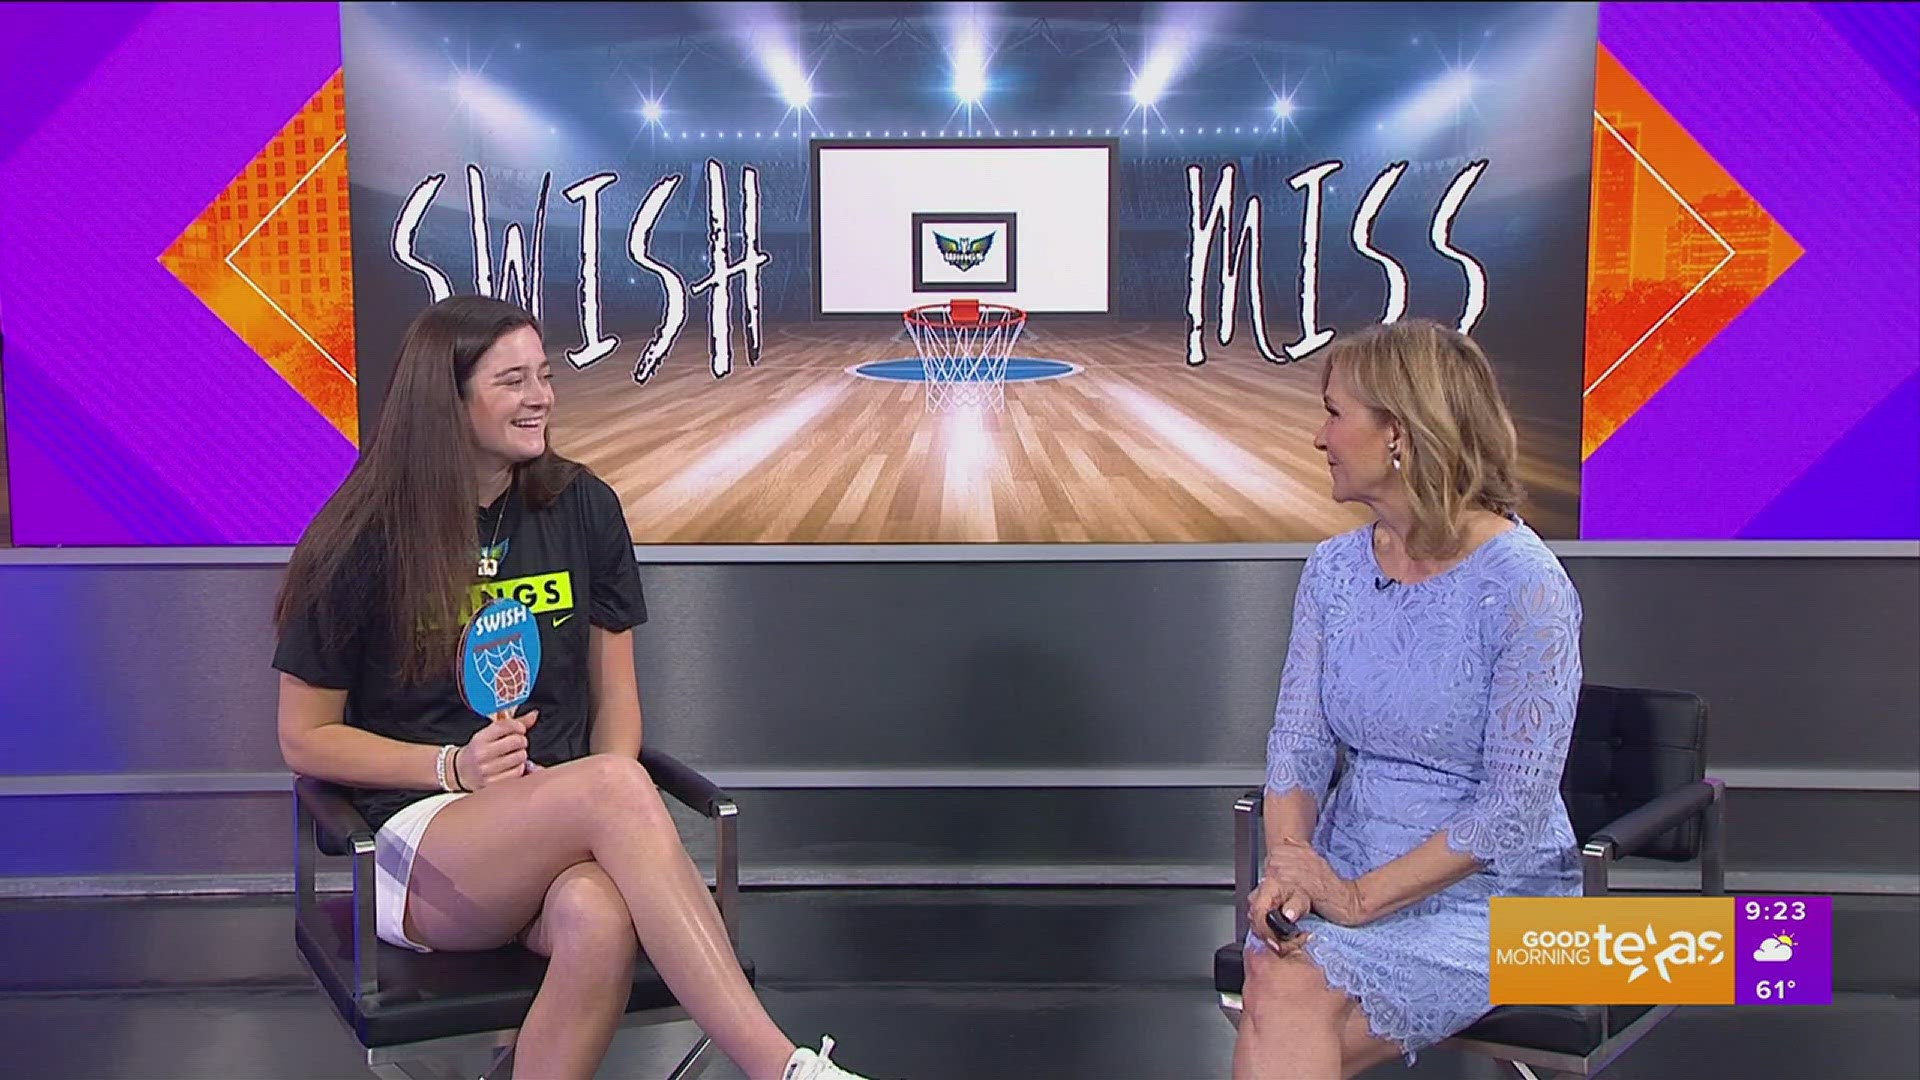 The WNBA season tips off next month and we sit down with the newest addition to the Dallas Wings line-up – find out what would make her swish or miss!